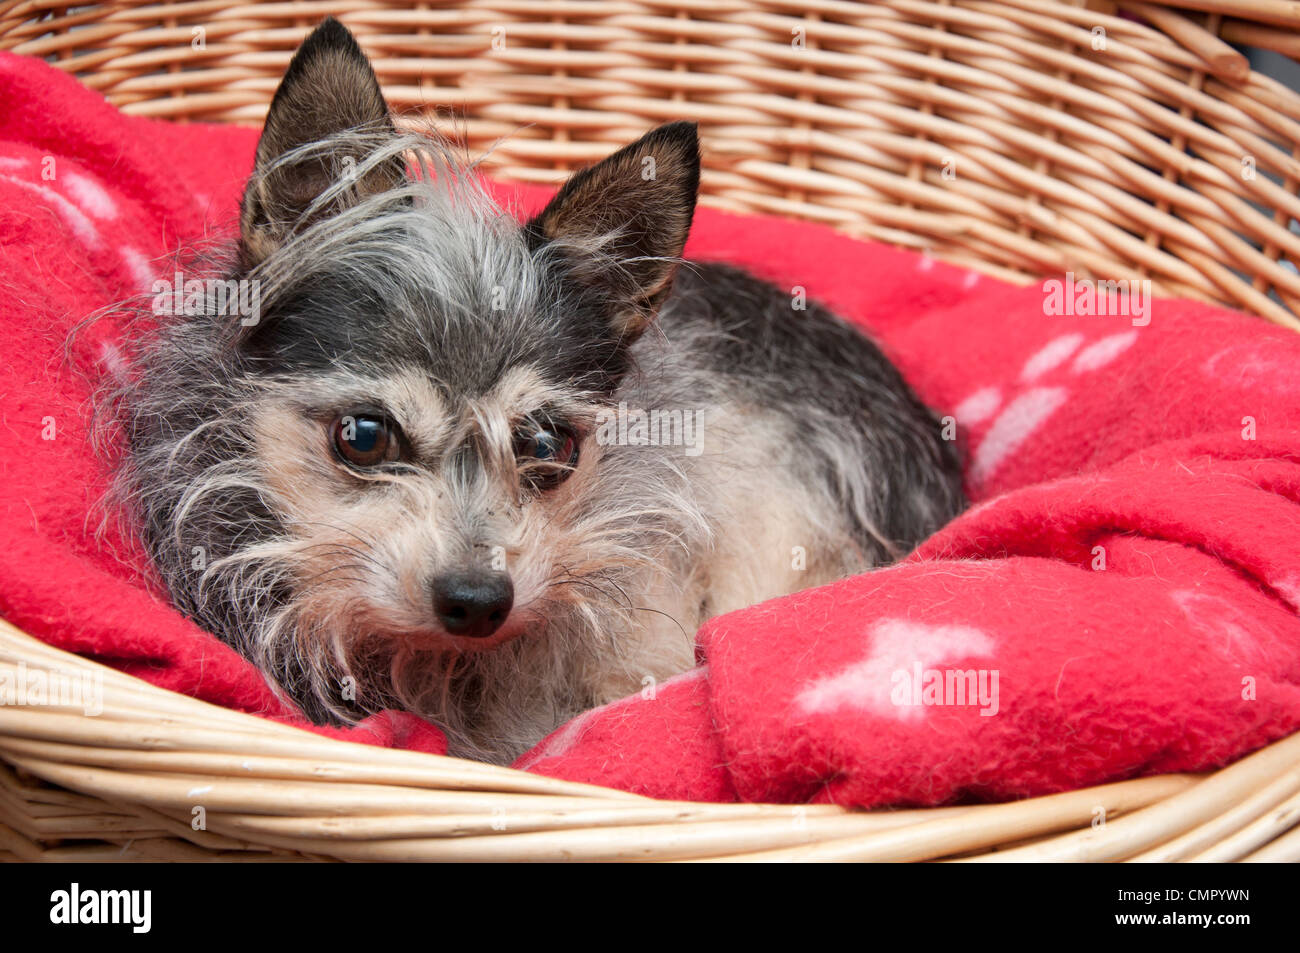 Cute small dog, chihuahua / terrier cross, sitting in her basket. Stock Photo